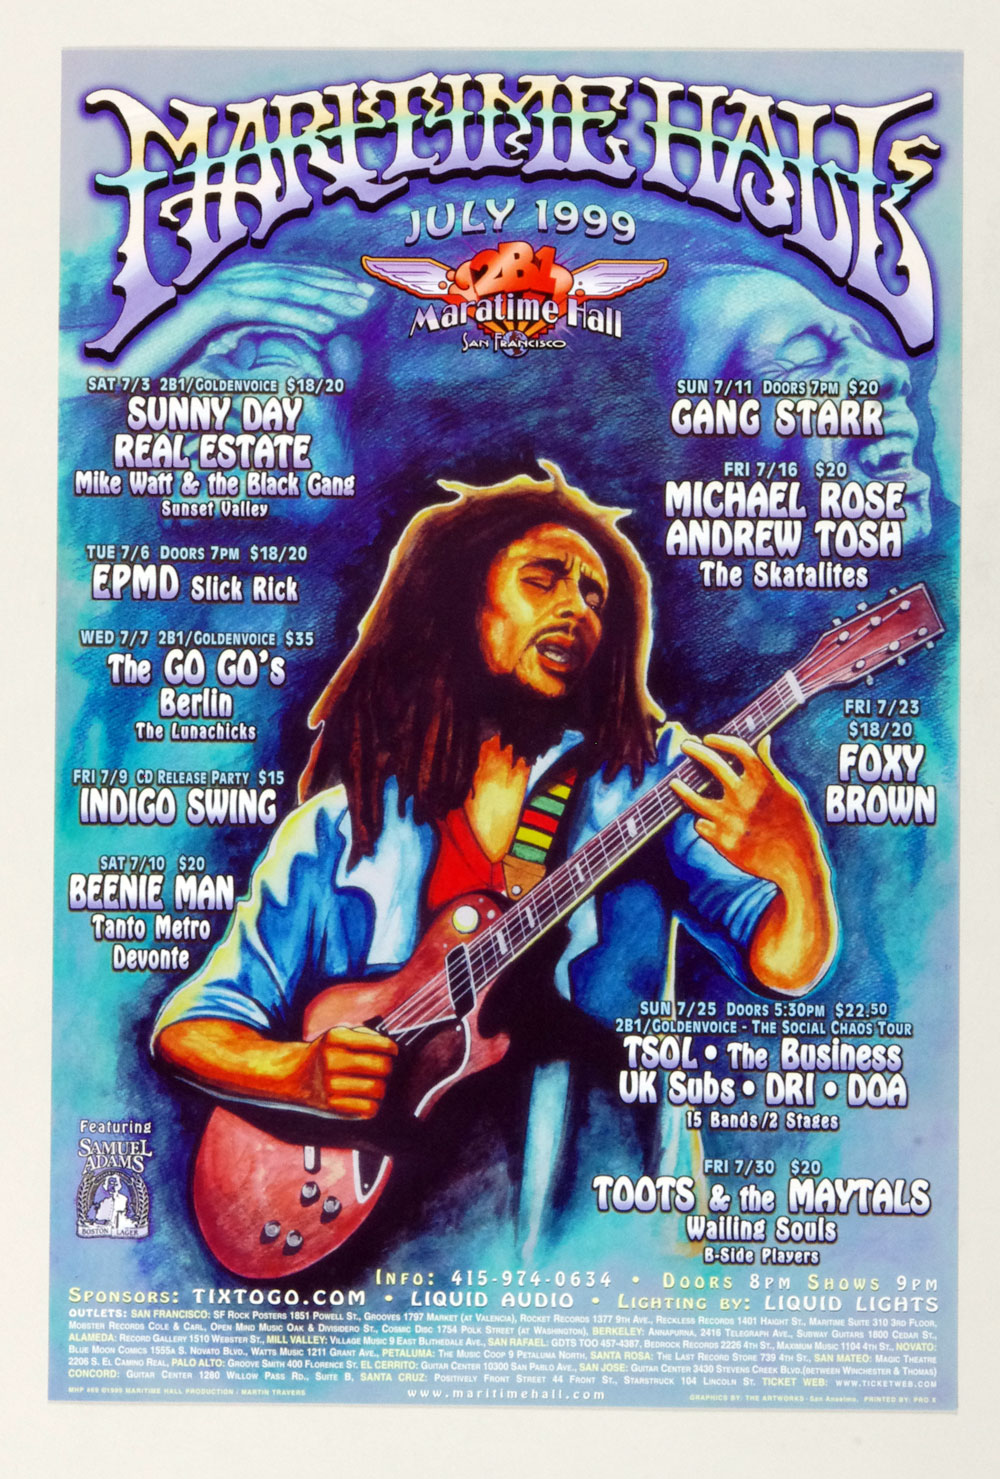 Maritime Hall 1999 July Poster Andrew Tosh Toot & The Maytals